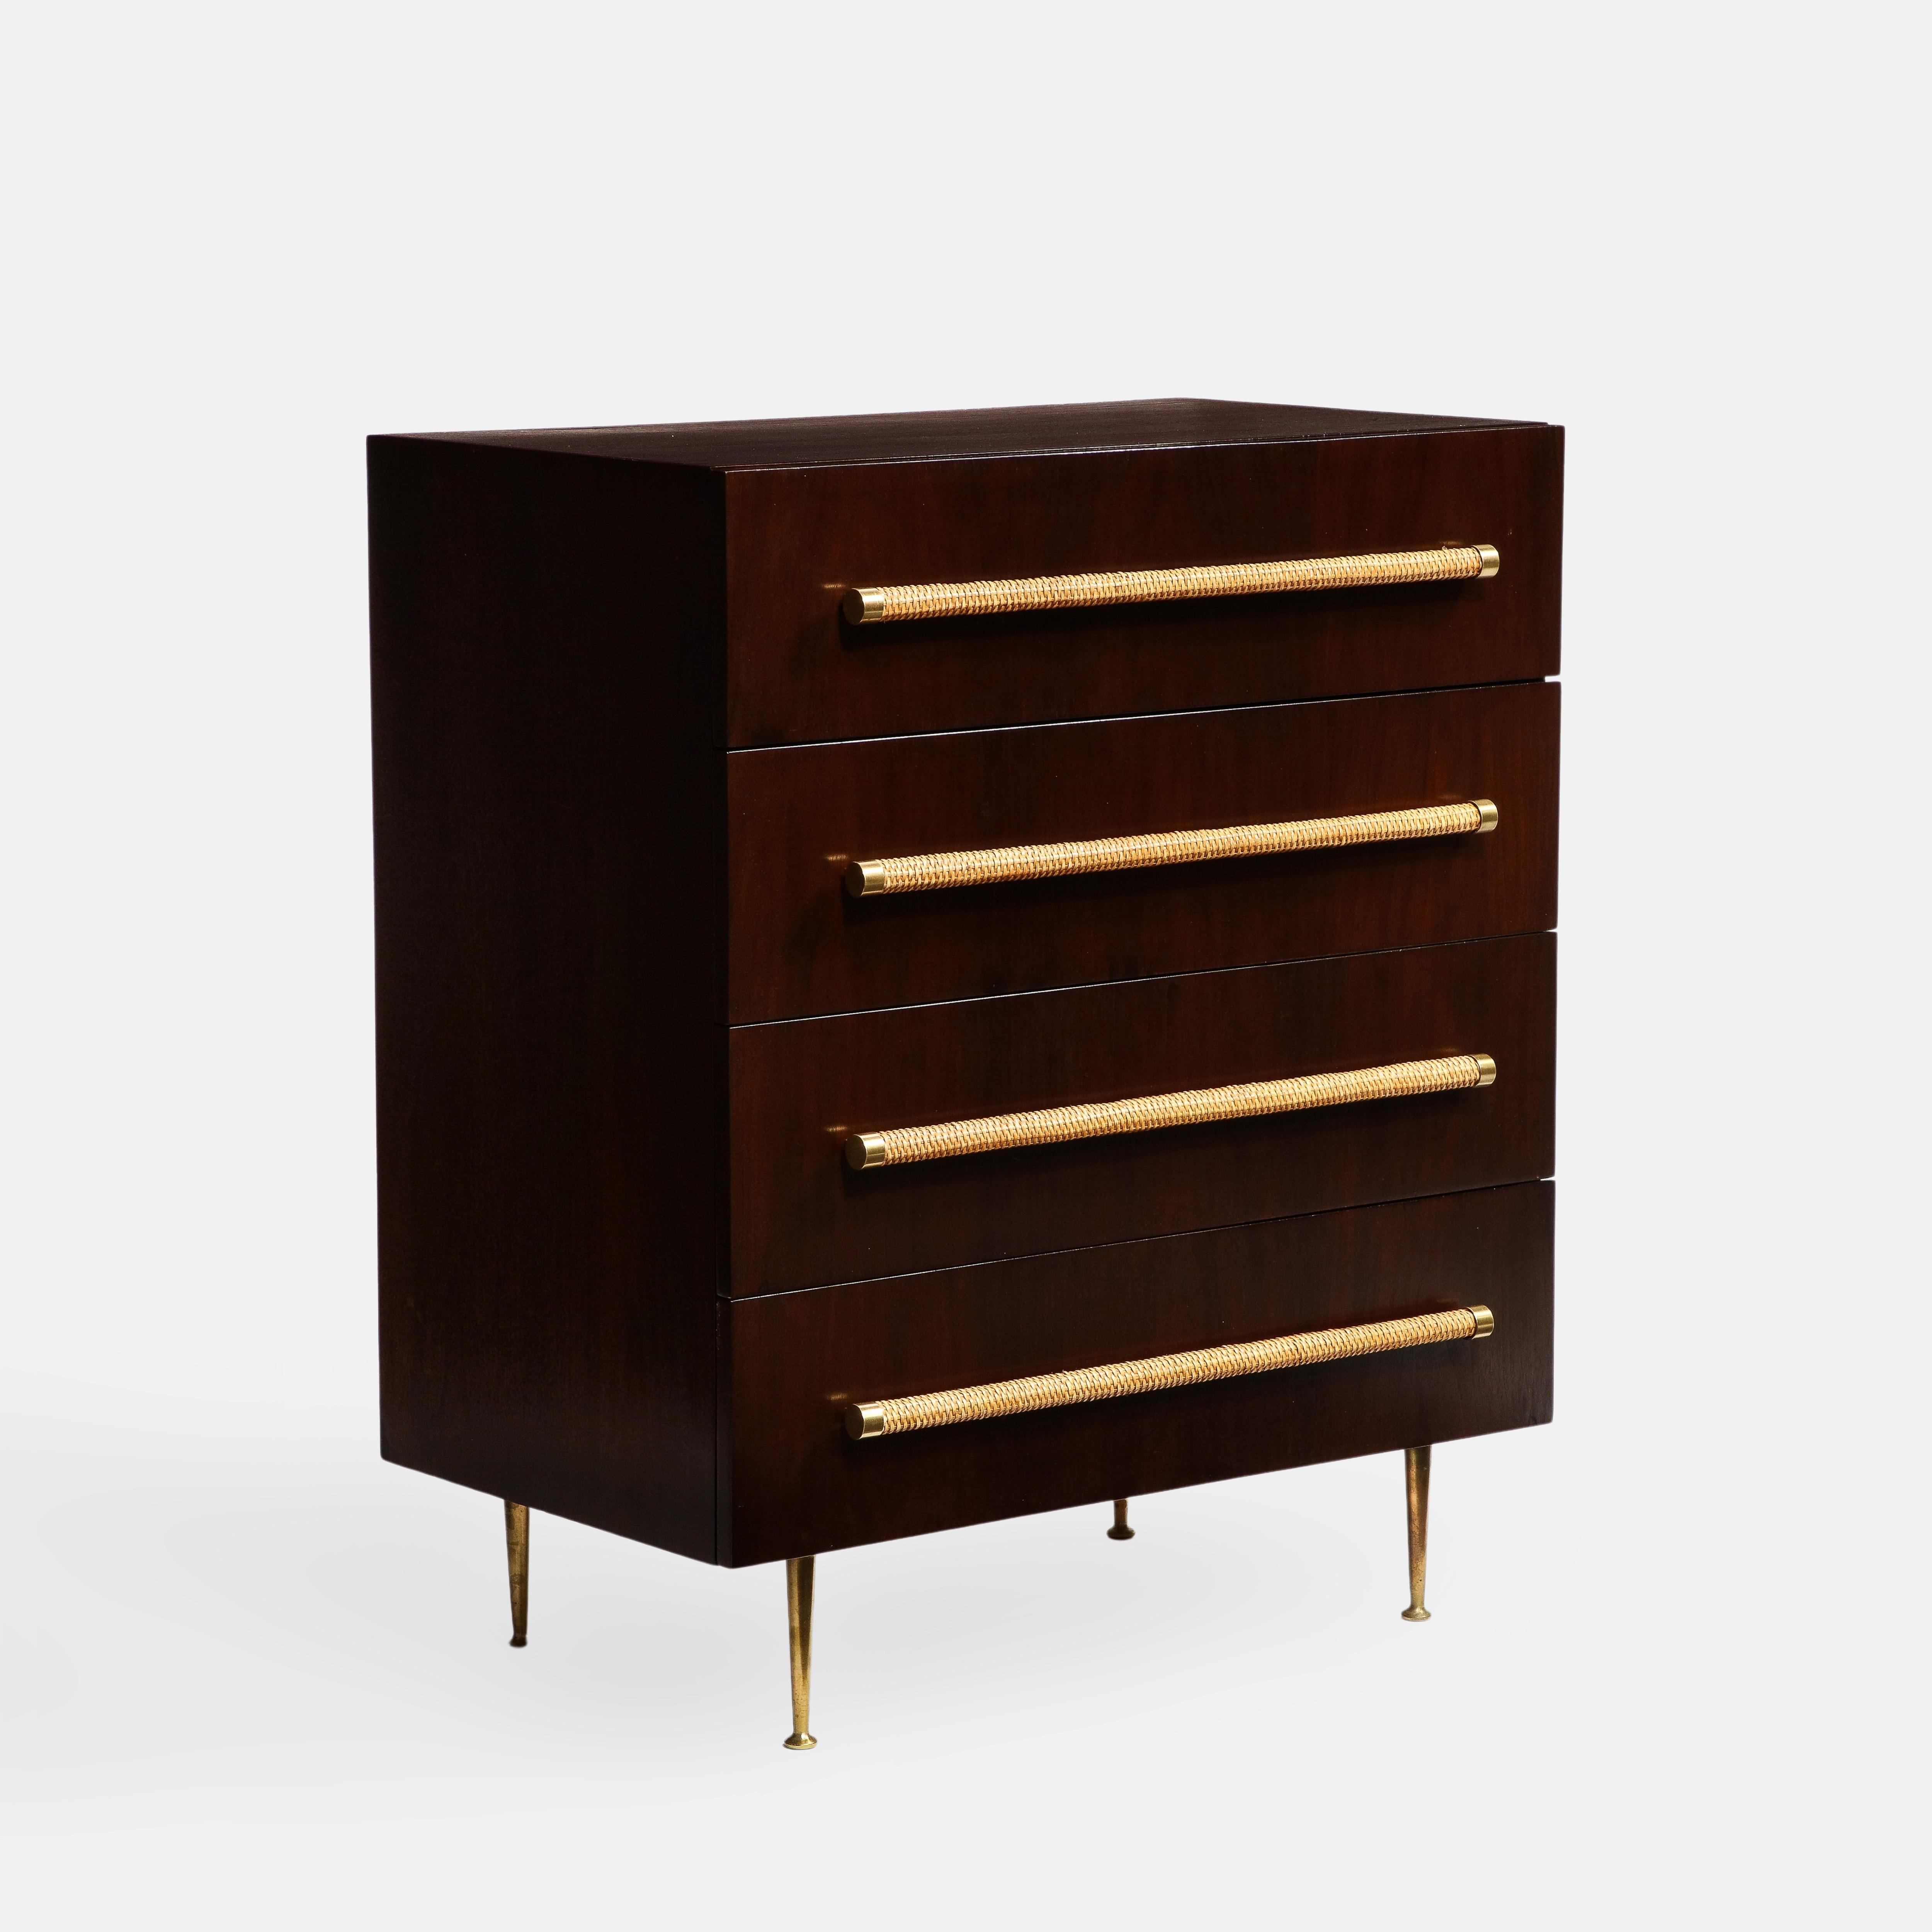 T.H. Robsjohn-Gibbings for Widdicomb Fuirniture Co. dresser or chest of drawers in dark stained walnut with four circular woven rattan handles and brass end caps ending on tapering brass legs with circular brass feet.  This exquisitely crafted chest